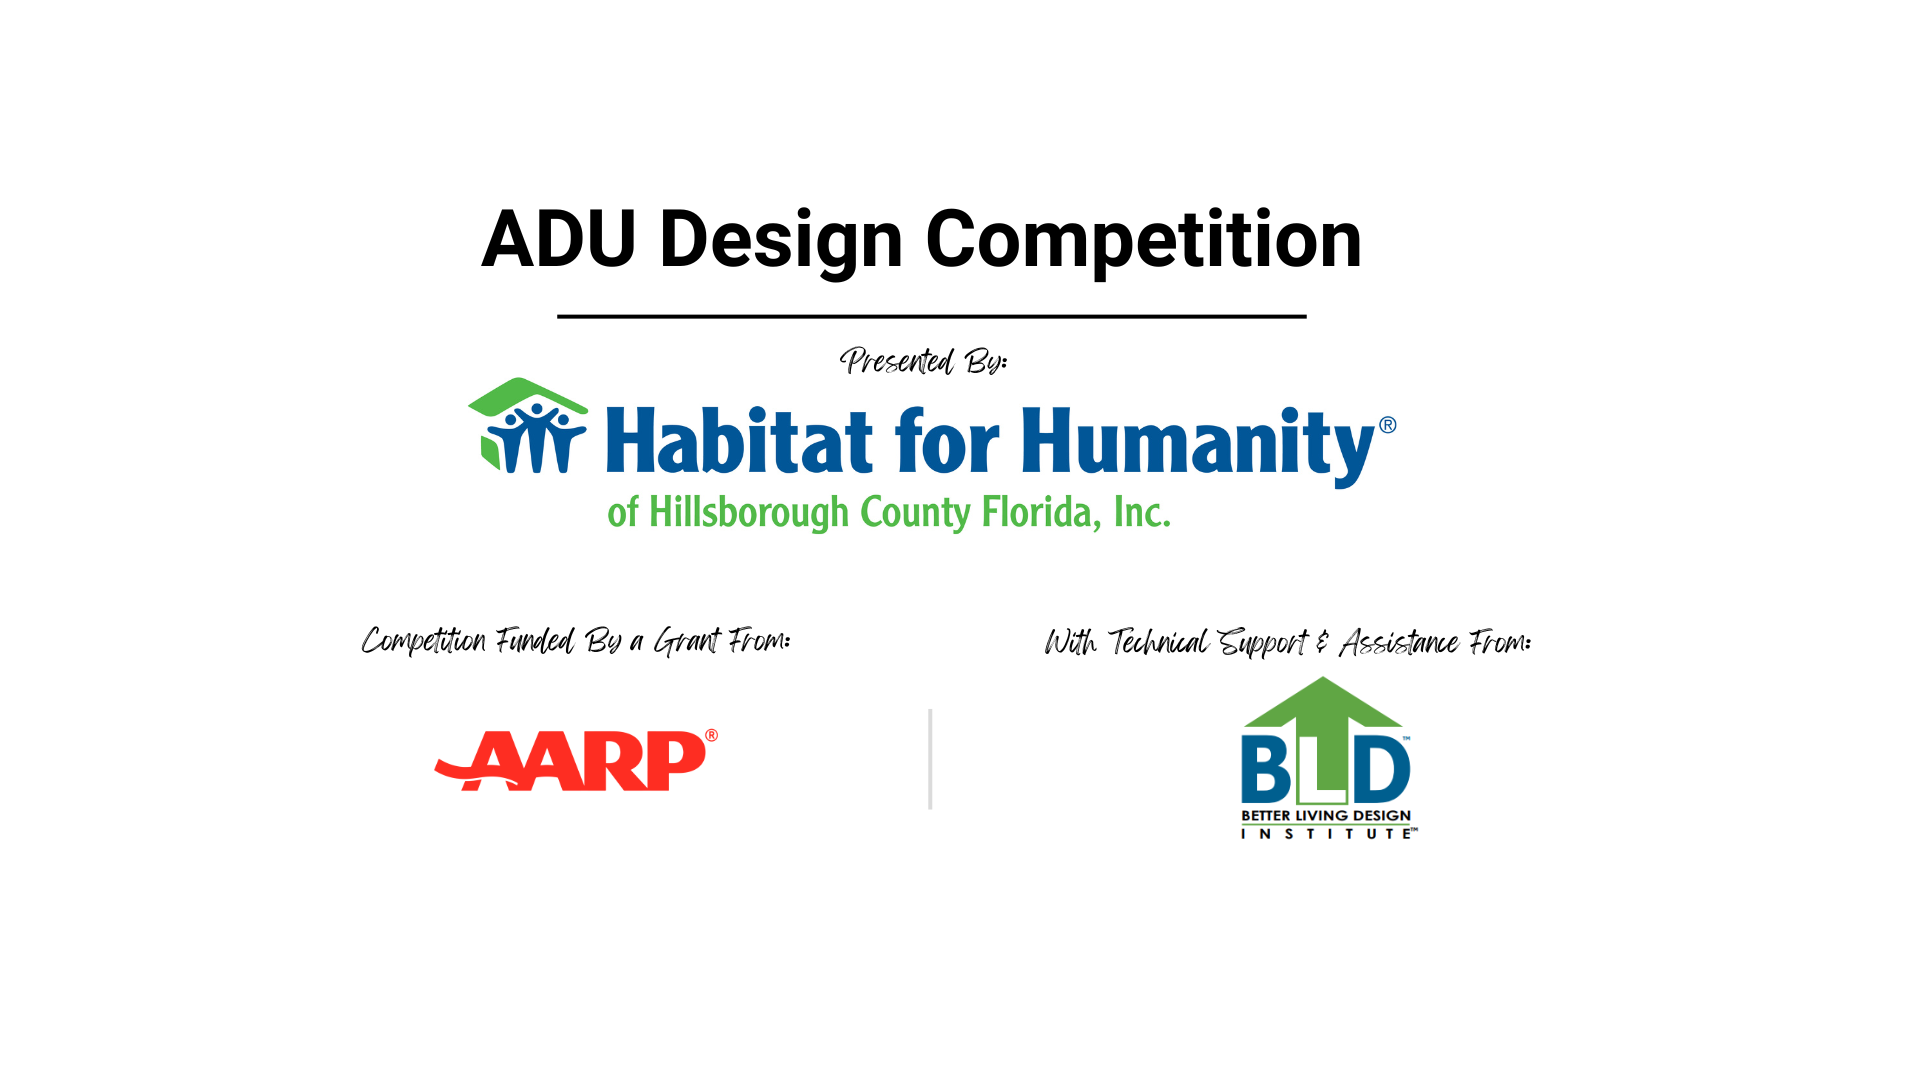 ADU Design Competition Guidelines - Habitat for Humanity of Hillsborough  County, FL